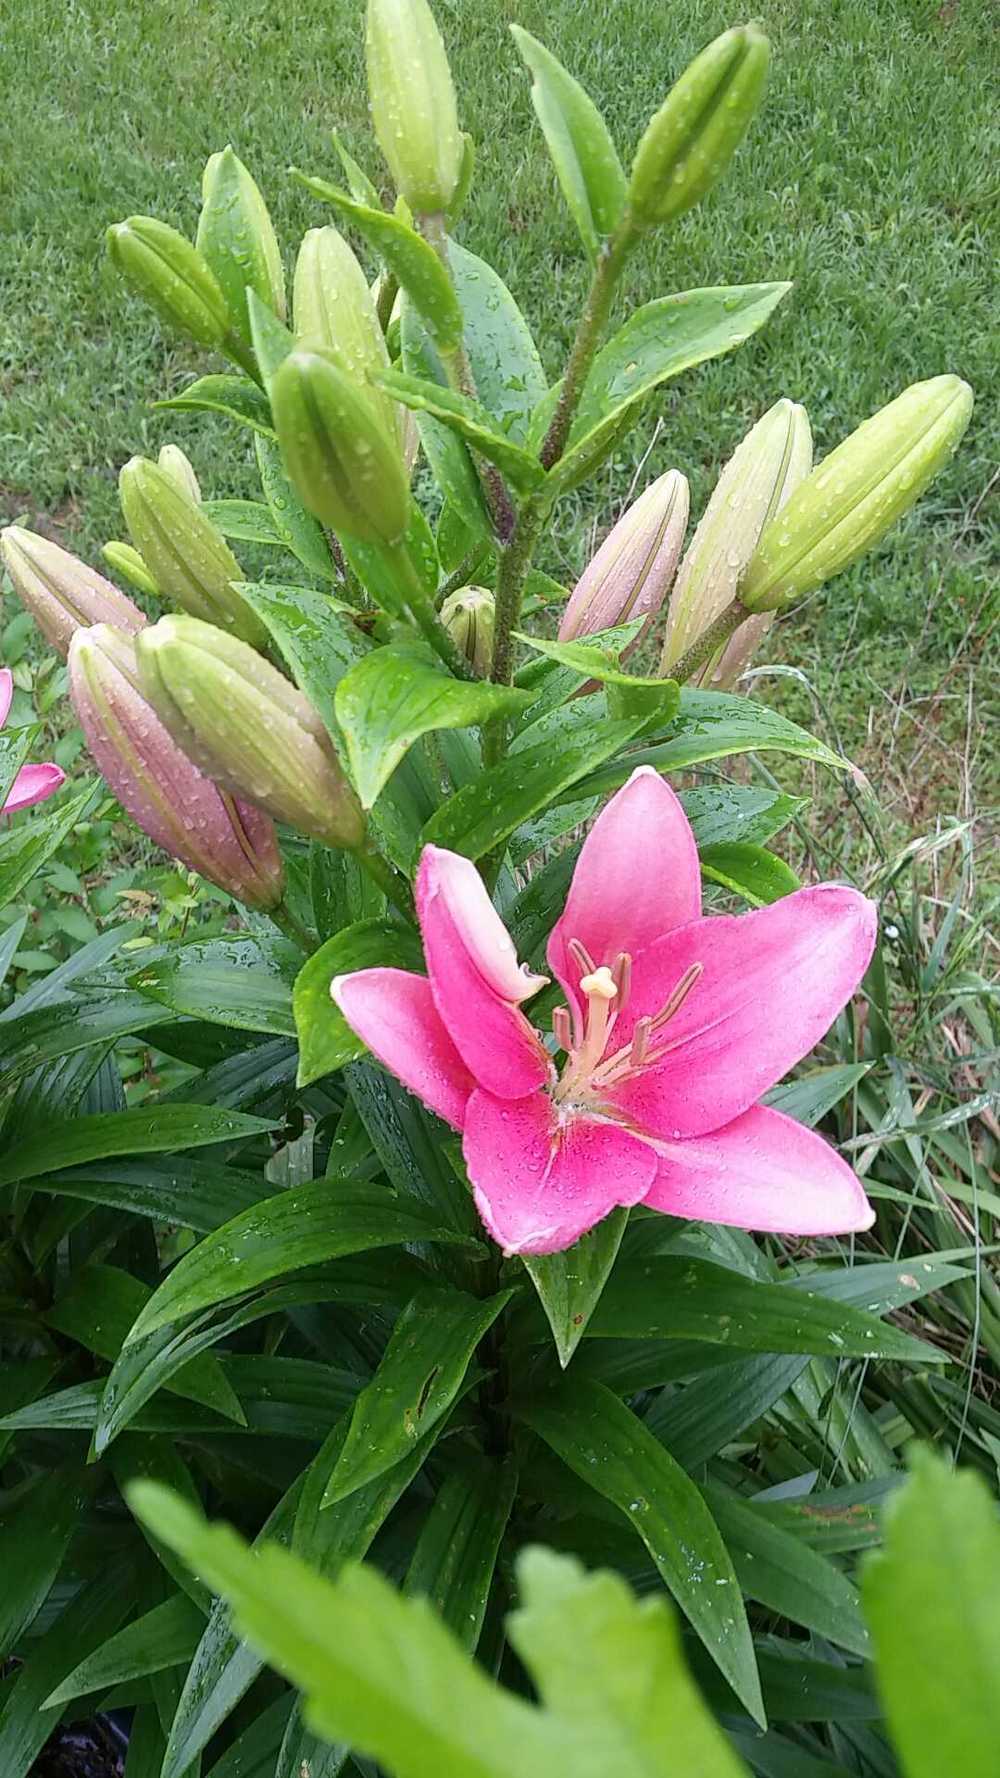 Photo of Lilies (Lilium) uploaded by JamesAcclaims